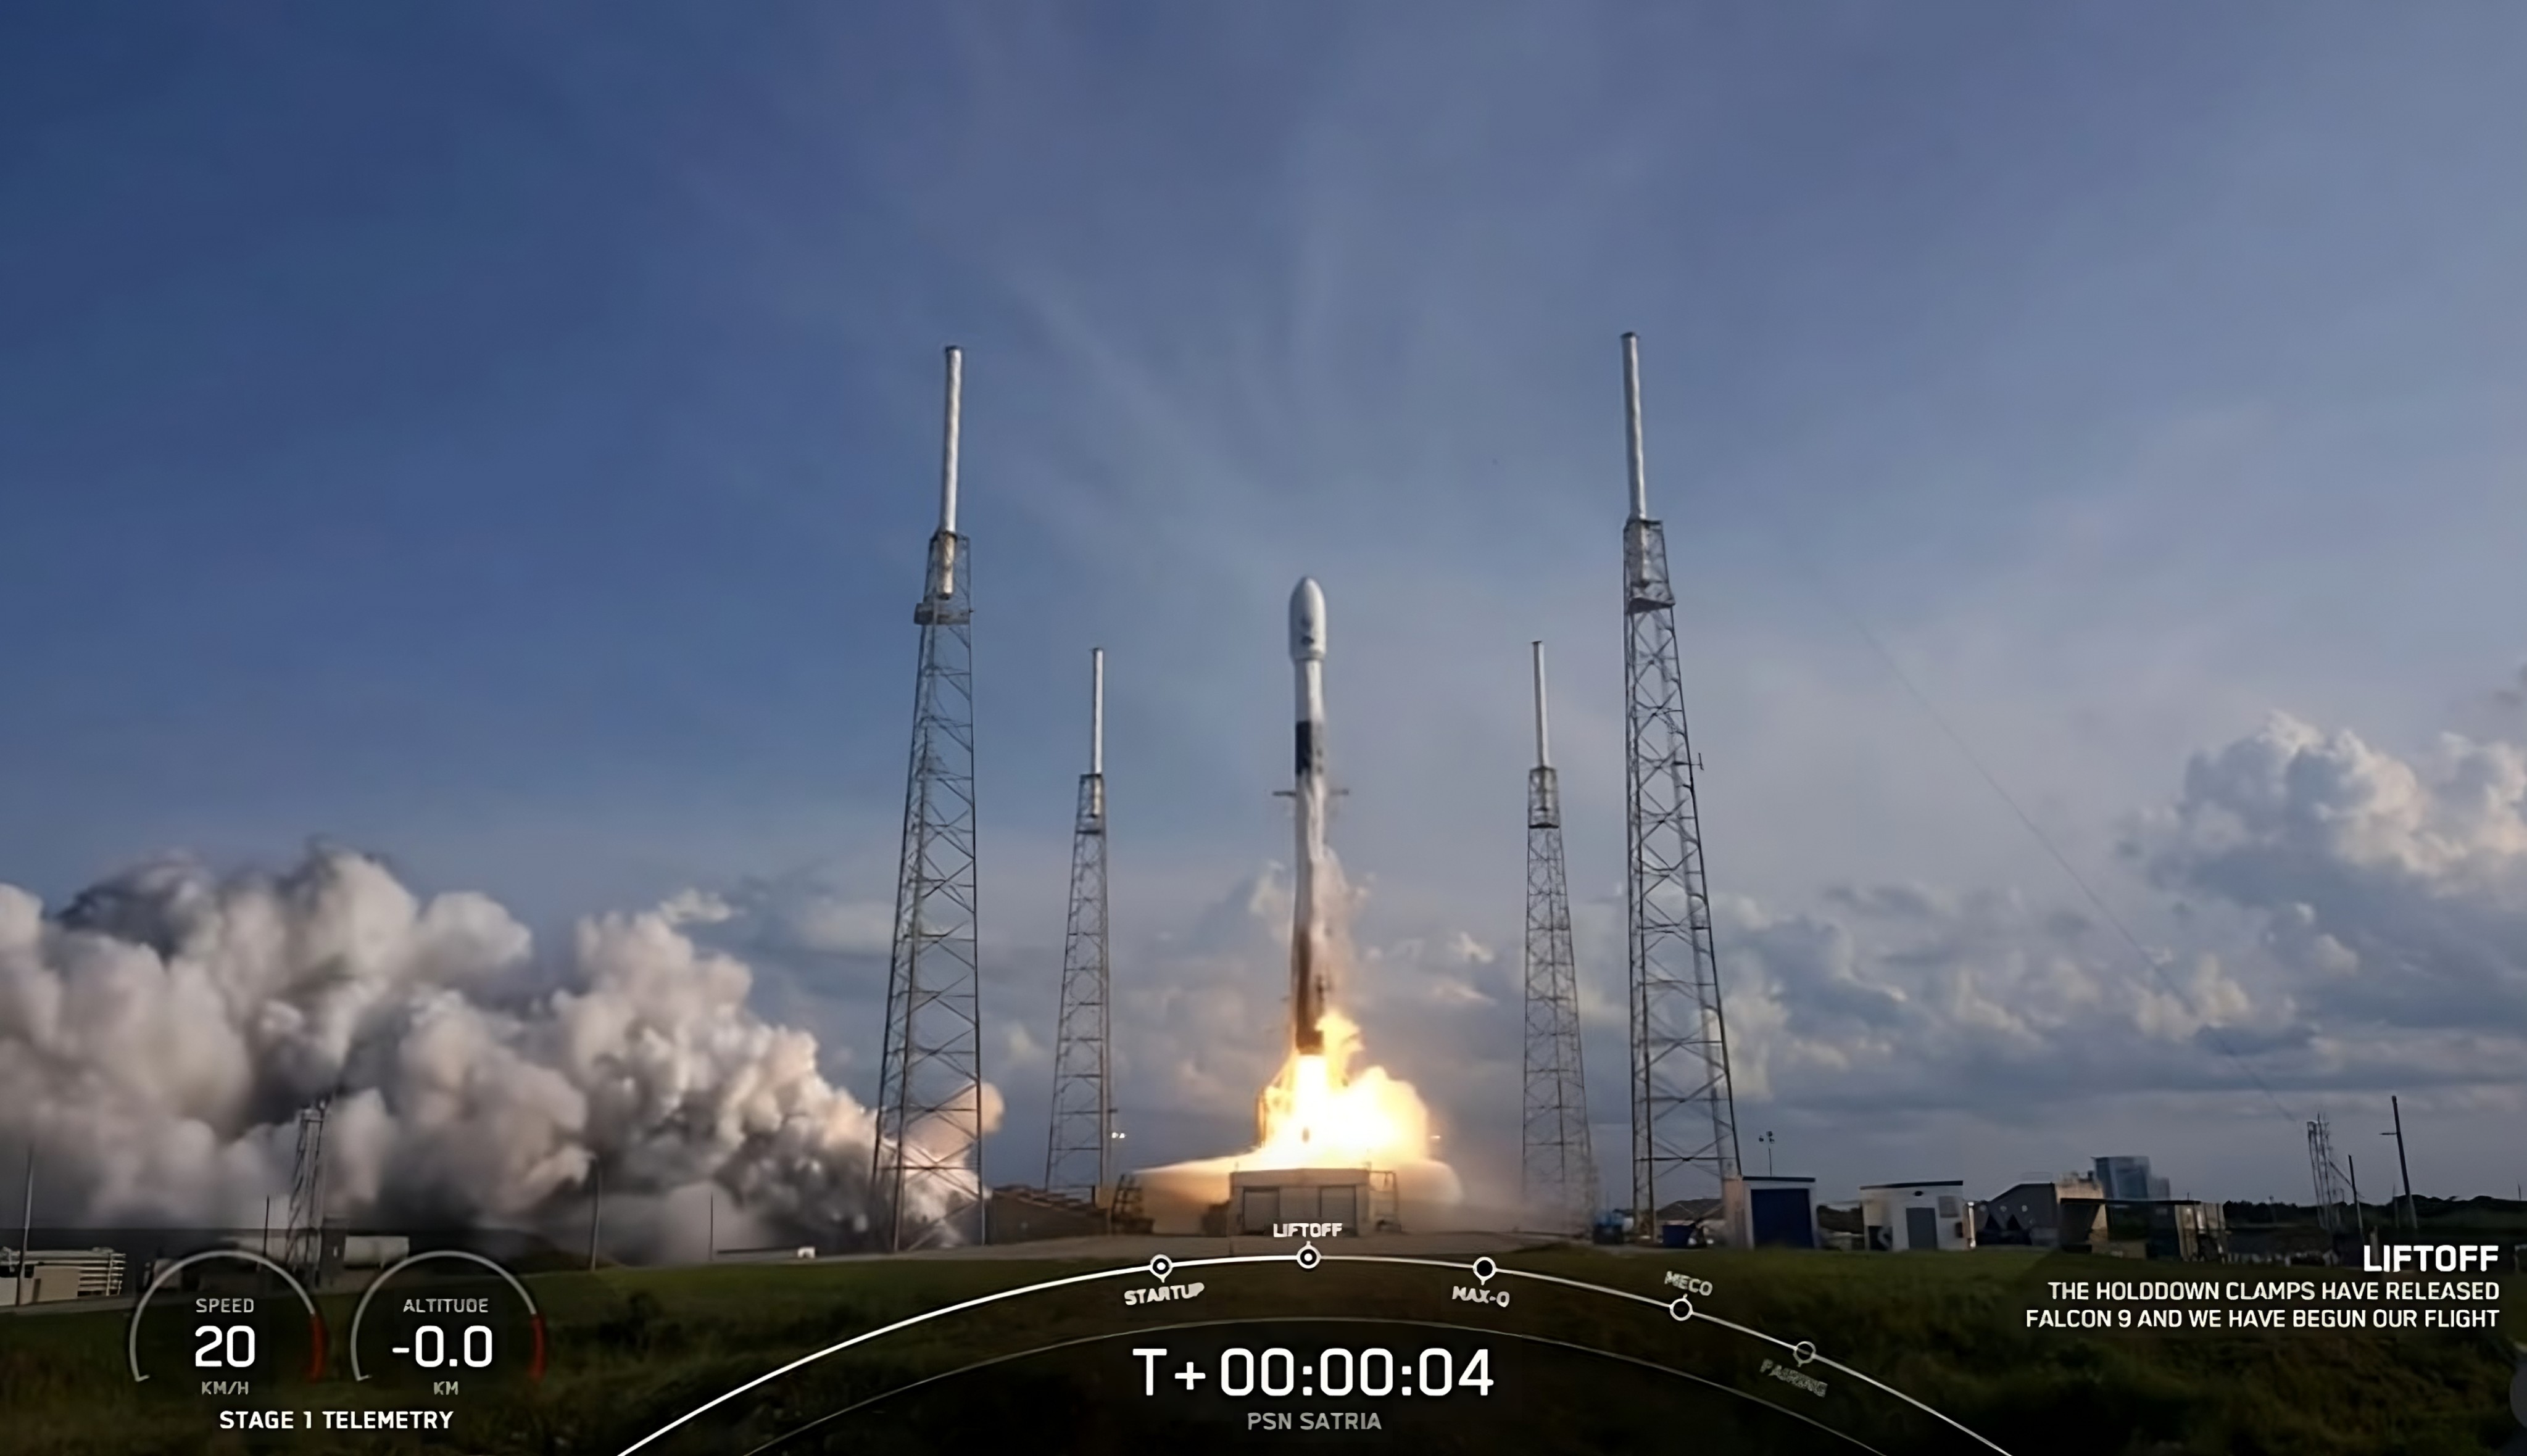 A SpaceX Falcon 9 rocket carrying Indonesia’s Satria-1 satellite blasts off from Cape Canaveral in Florida in this screengrab from a video shared on social media by Indonesian President Joko Widodo. Photo: Instagram/@jokowi